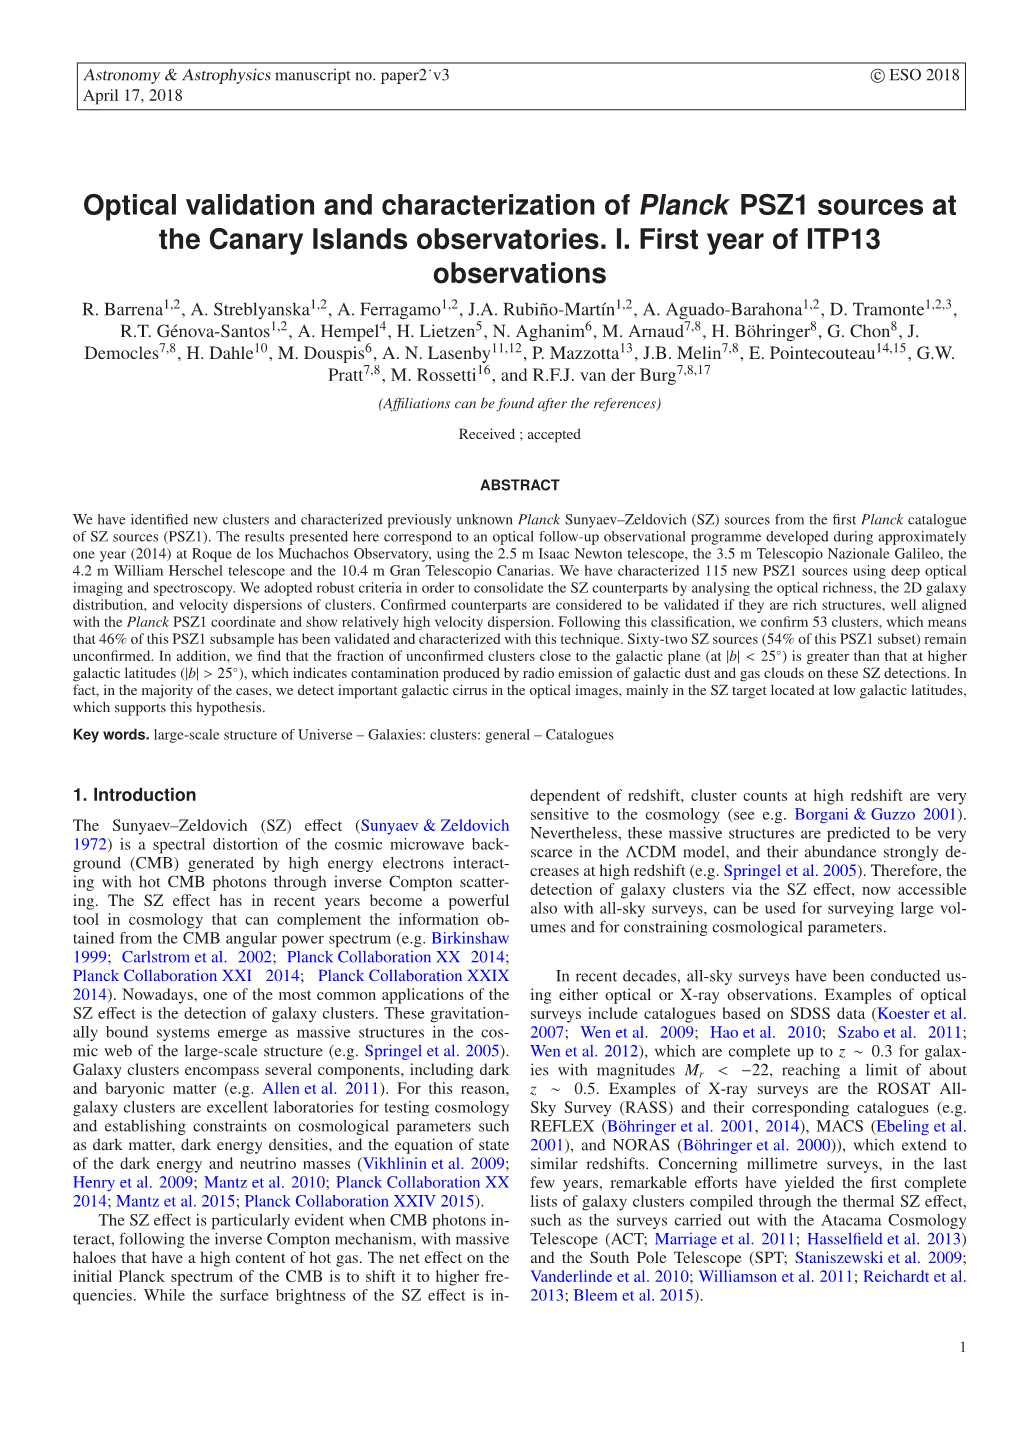 Optical Validation and Characterization of Planck PSZ1 Sources at the Canary Islands Observatories